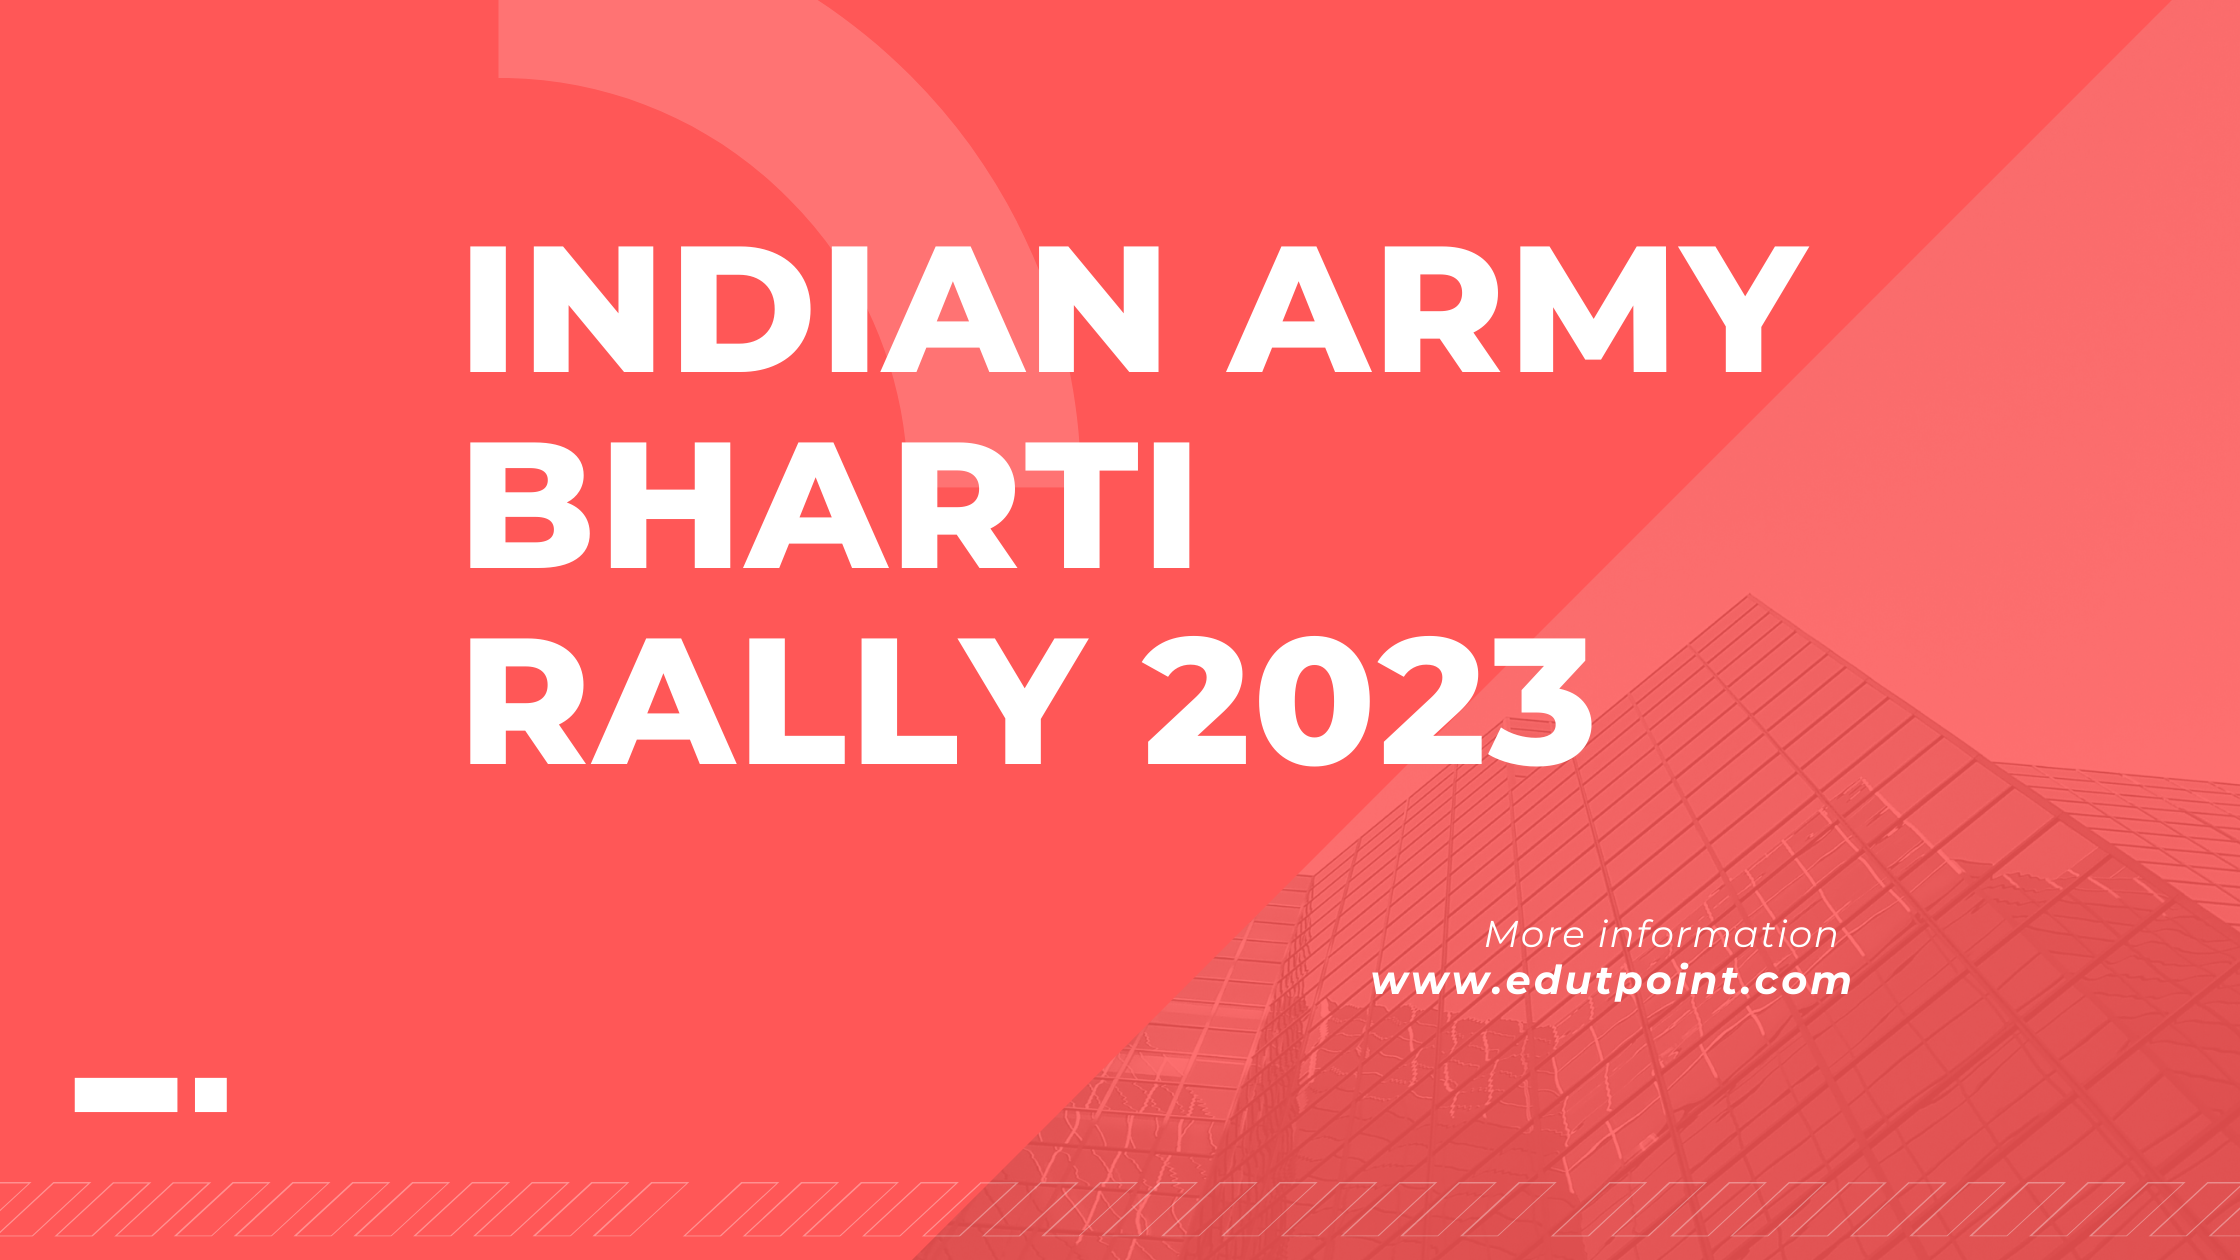 Indian Army Bharti Rally 2023 | Army Recruitment Rally Application Started in UP